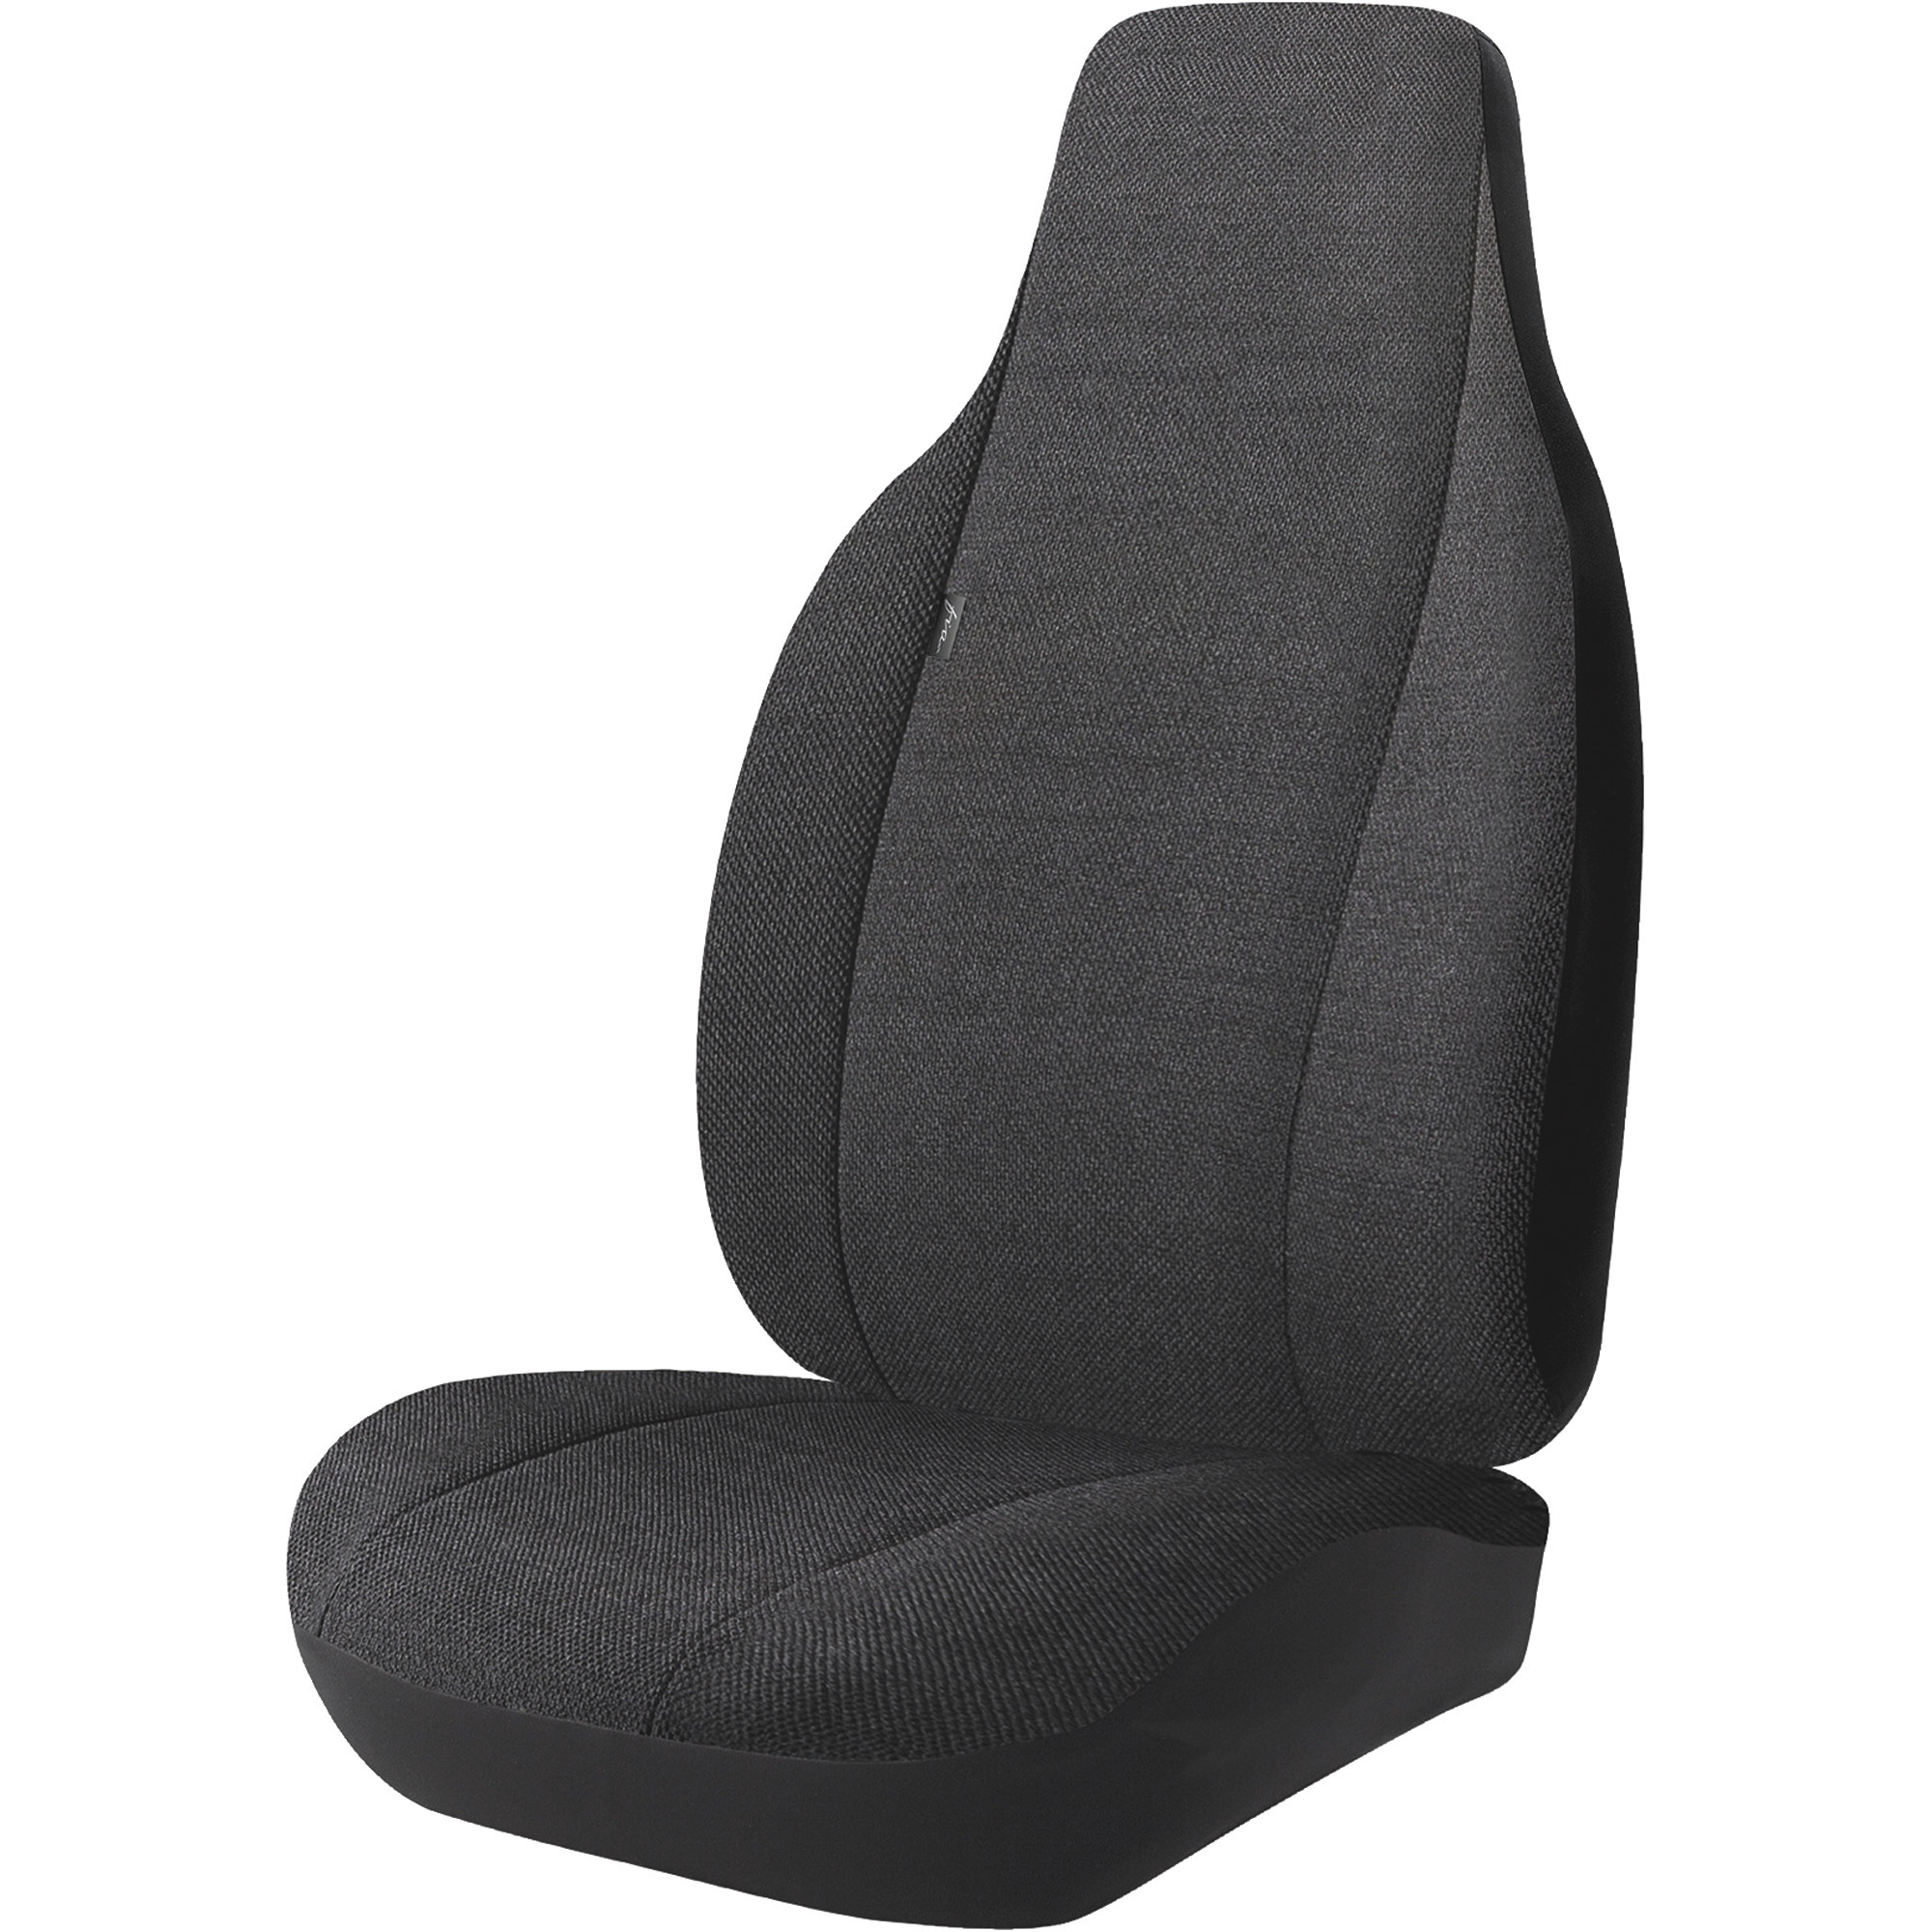 FiA Bostrom T-Series High-Back Bucket Seat and Armrest Covers â Black, Single Bucket, Model TRS4003 BLACK